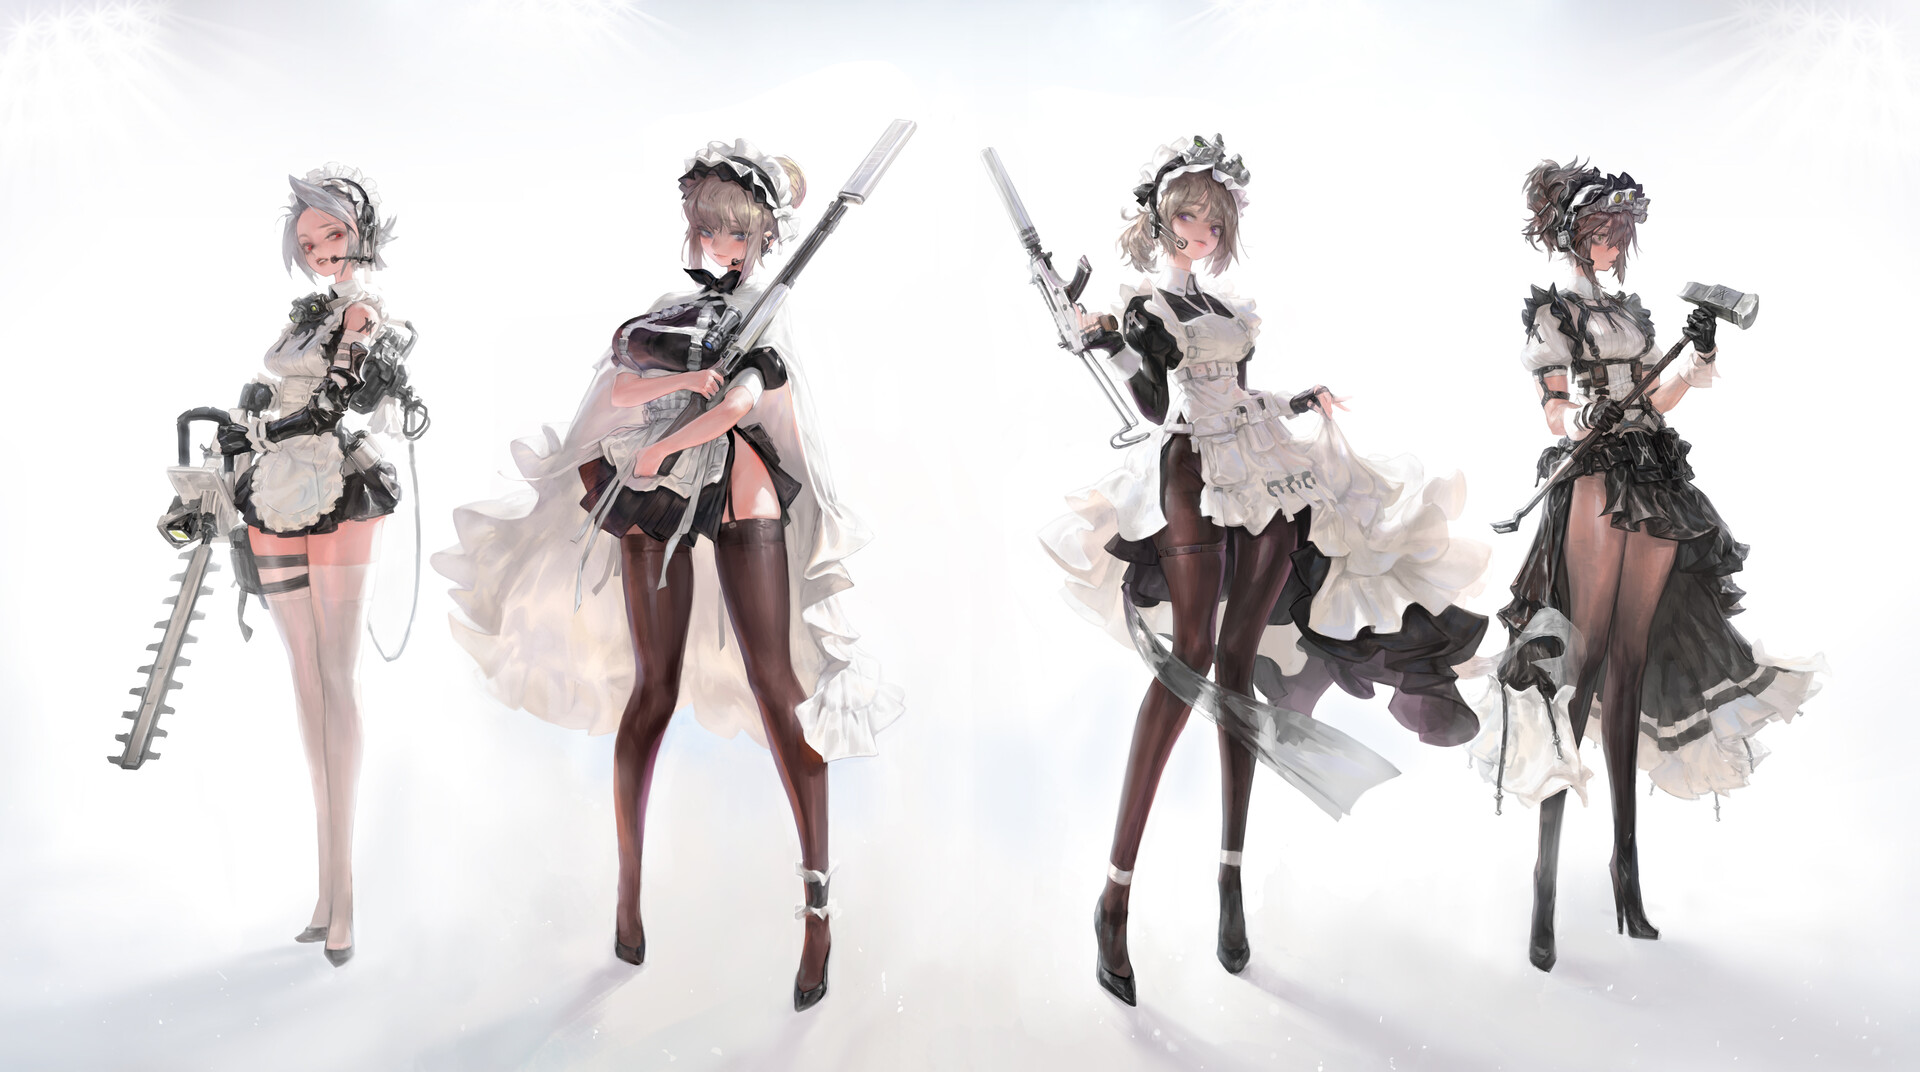 Anime 1920x1072 anime anime girls simple background white background girls with guns group of women legs stockings weapon standing heels thigh-highs pantyhose maid outfit AGOTO Combat Maid (AGOTO)